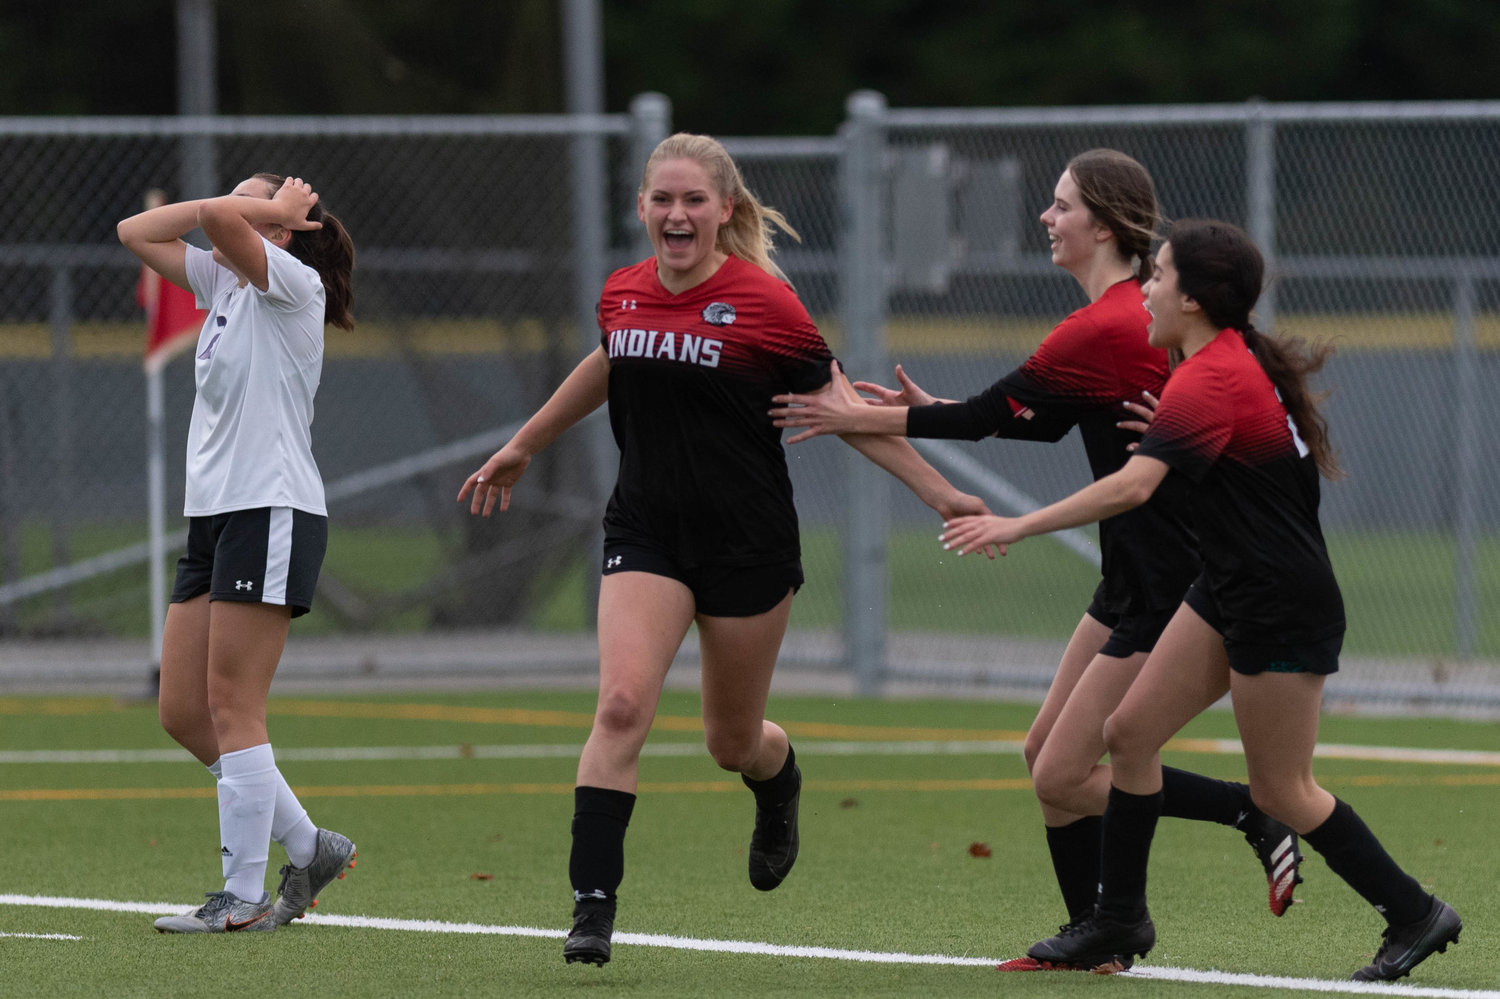 Vanesa Rodriguez celebrates her goal against Friday Harbor in the opening round of the WIAA 2B soccer tournament in Black Hills Nov. 10.